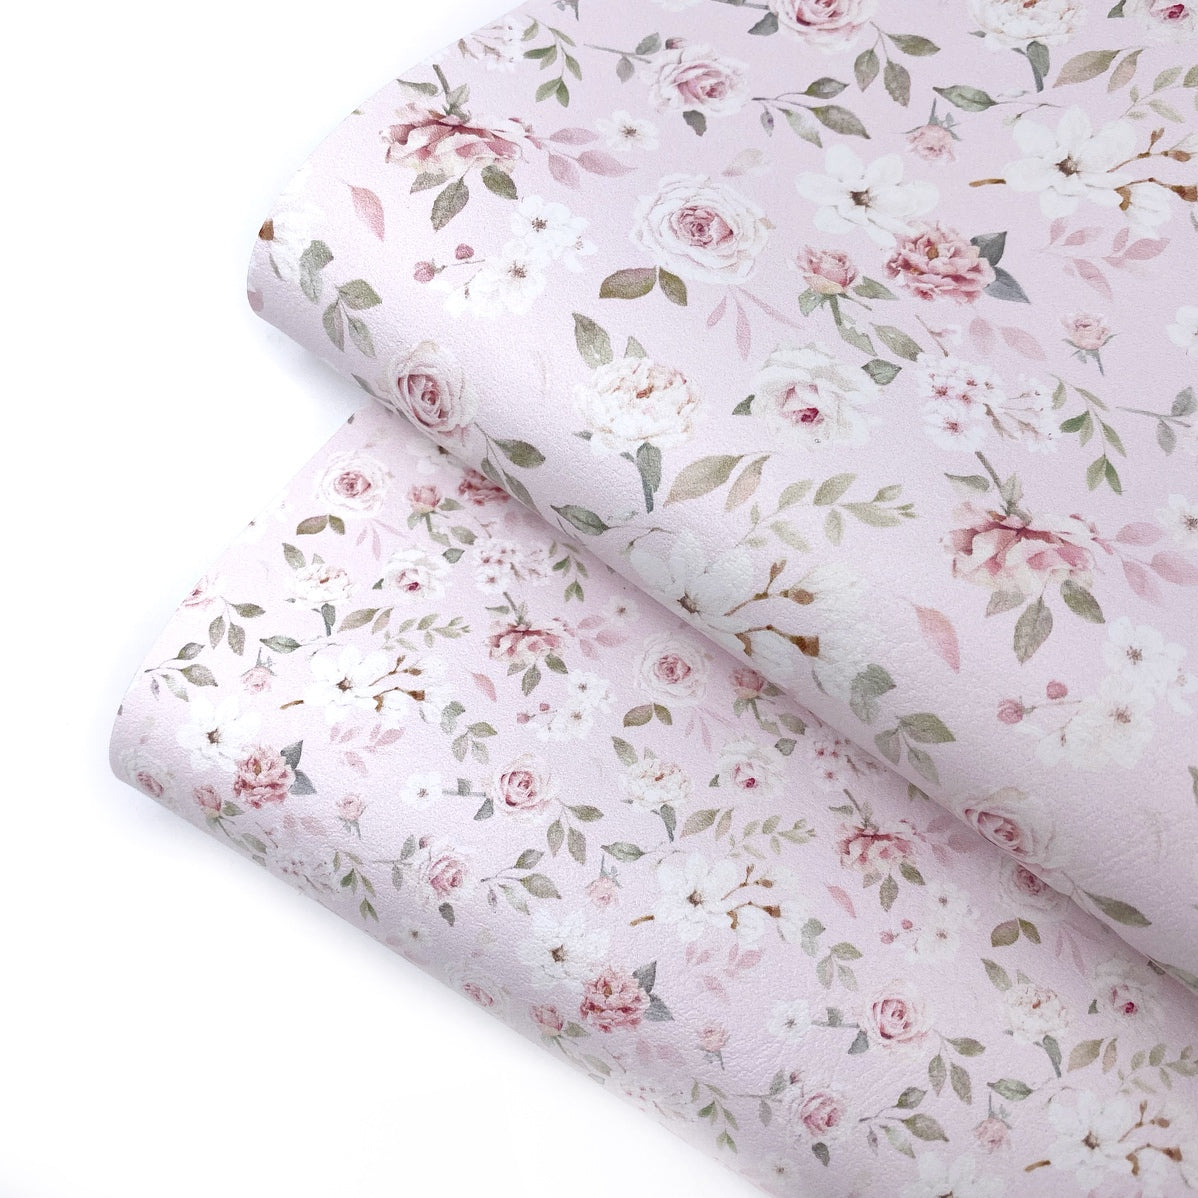 Pretty Pale Pink Roses Premium Faux Leather Fabric Sheets